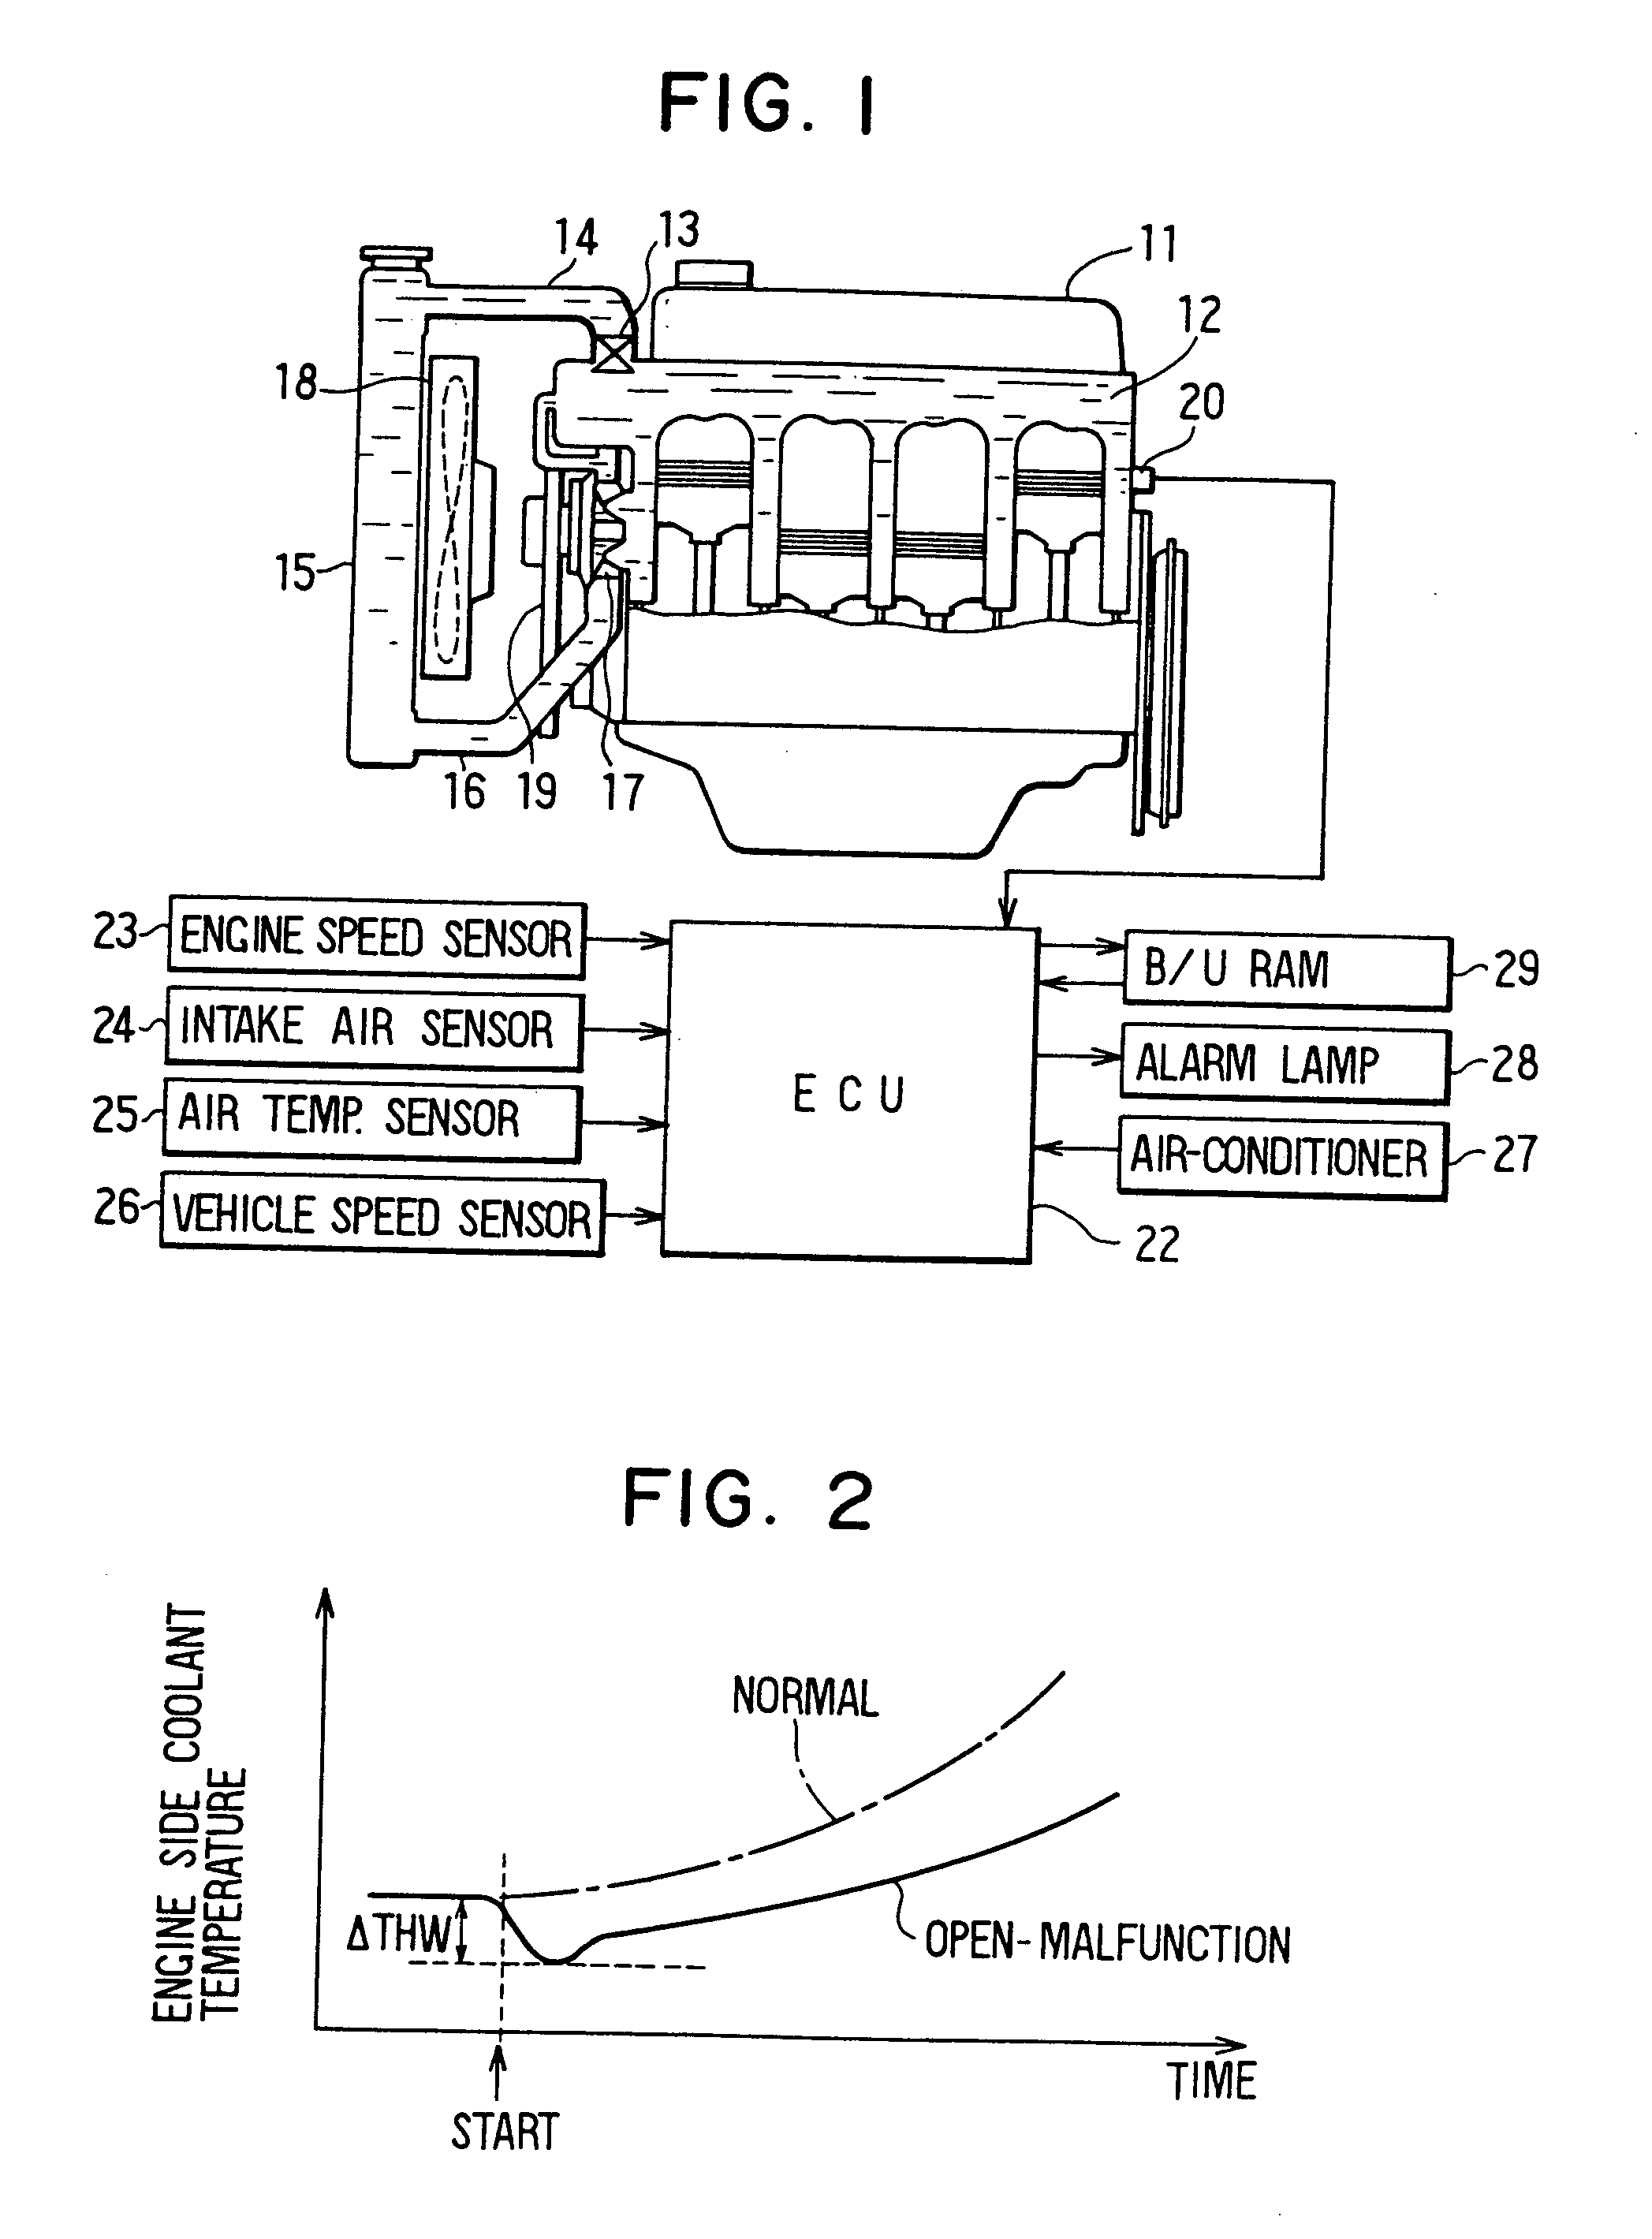 Thermostat malfunction detecting system for engine cooling system